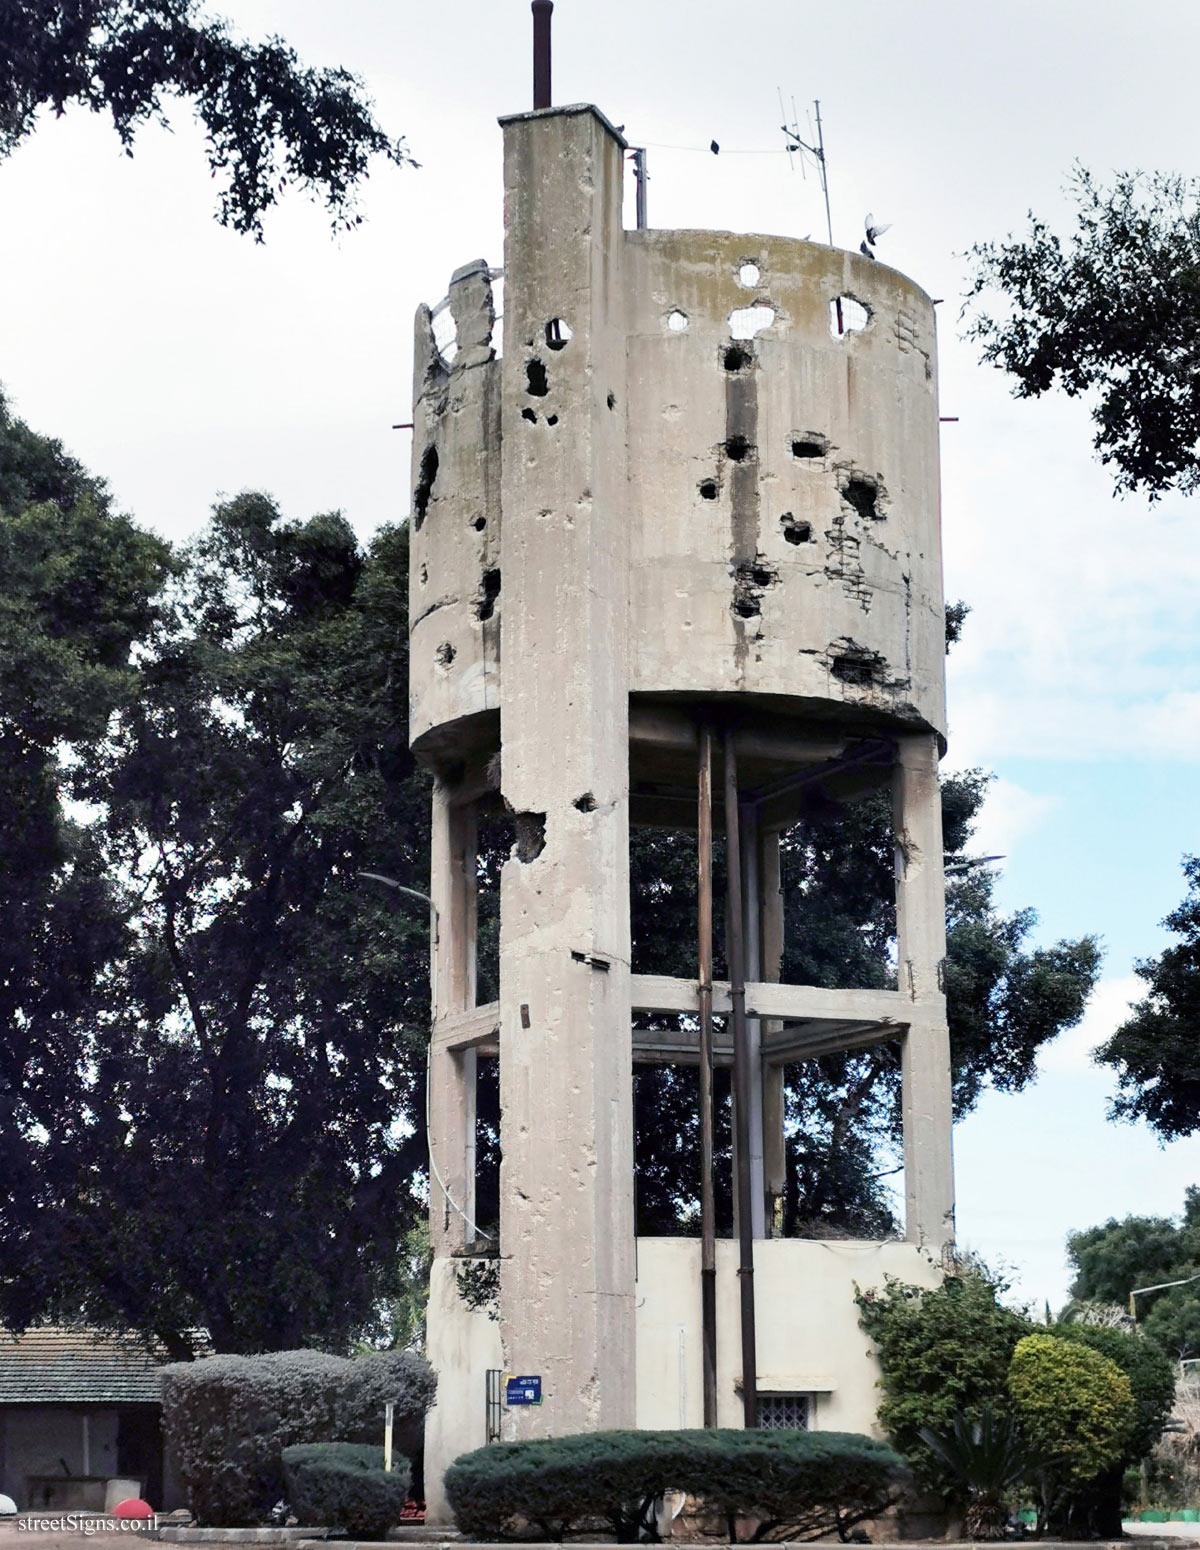 Negba - Heritage Sites in Israel - The water tower in Negba  - Negba, Israel